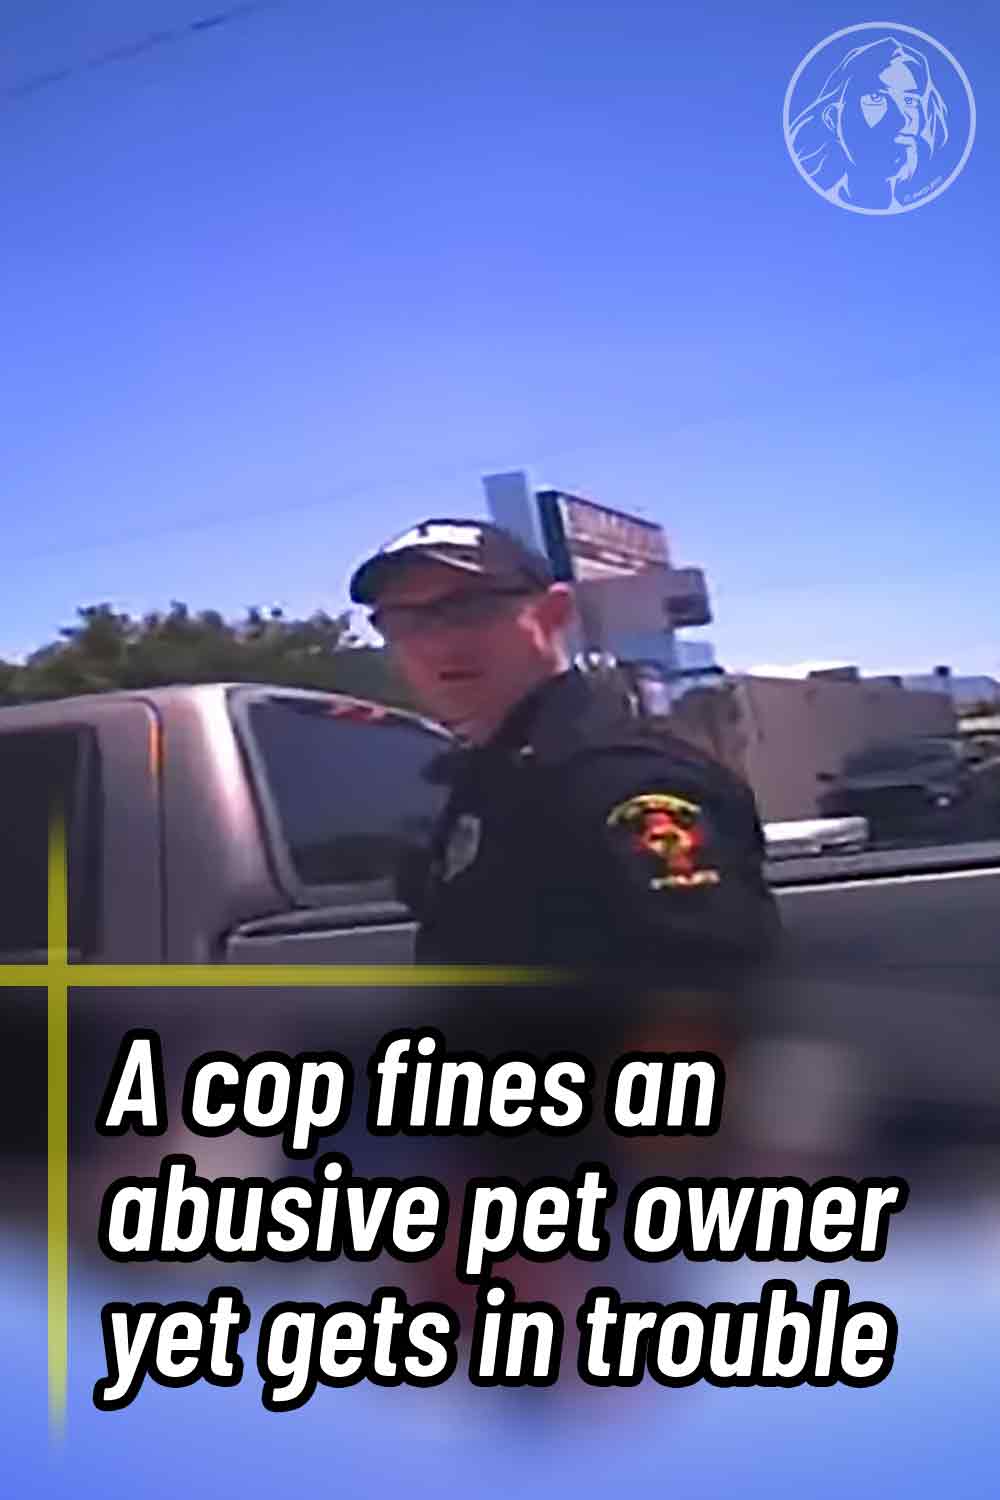 A cop fines an abusive pet owner yet gets in trouble